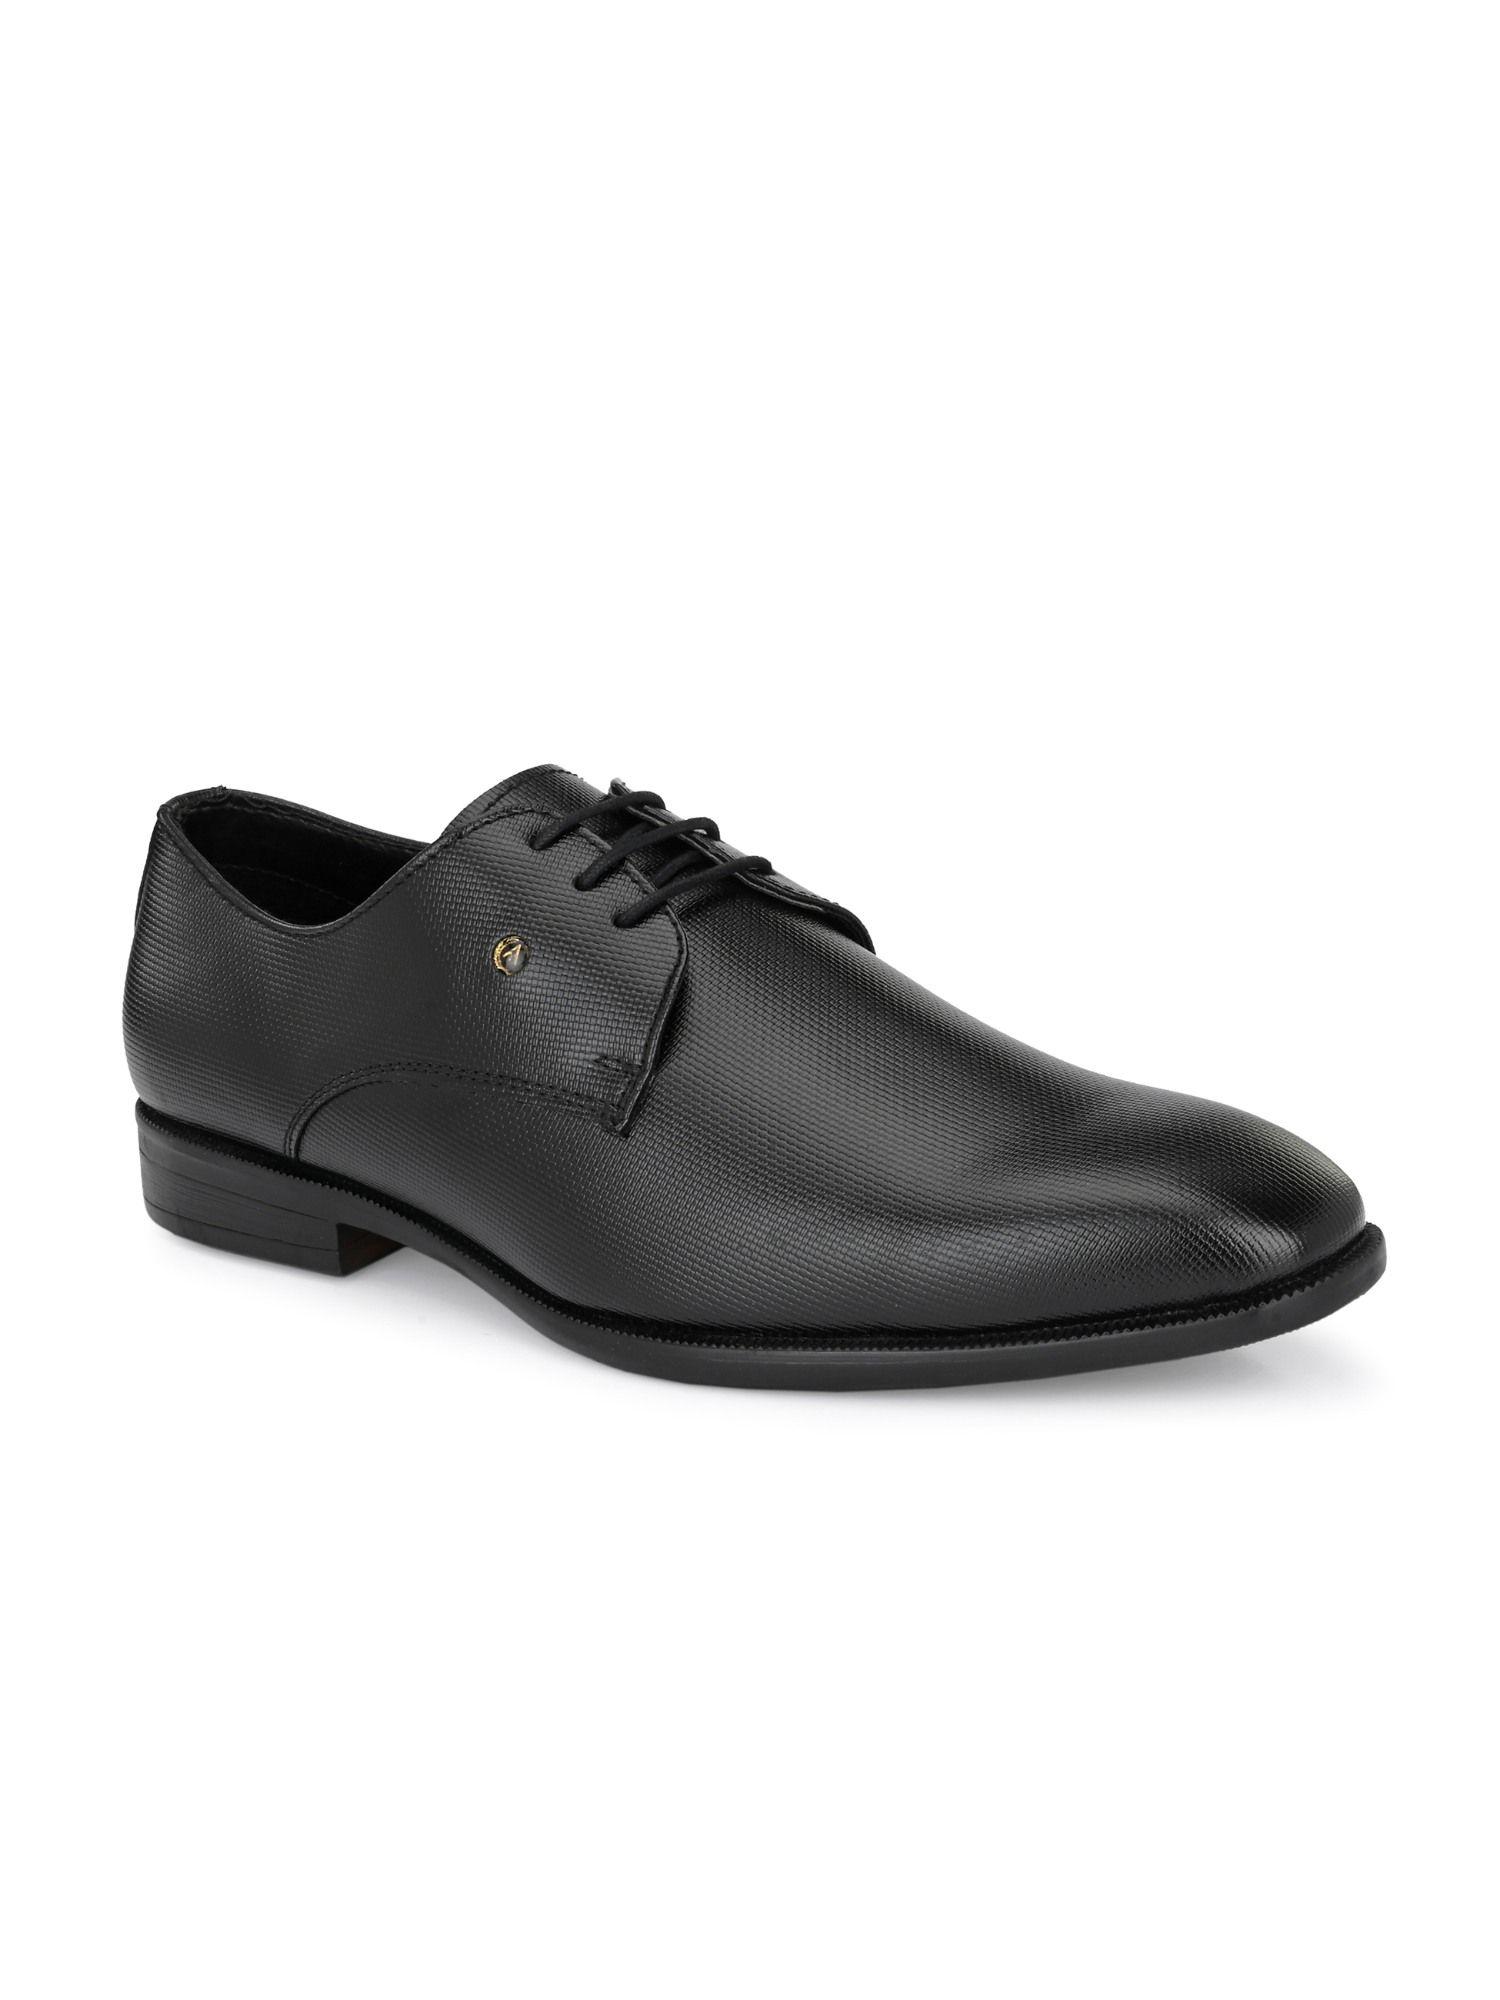 textured-synthetic-black-lace-up-formal-shoes-for-men